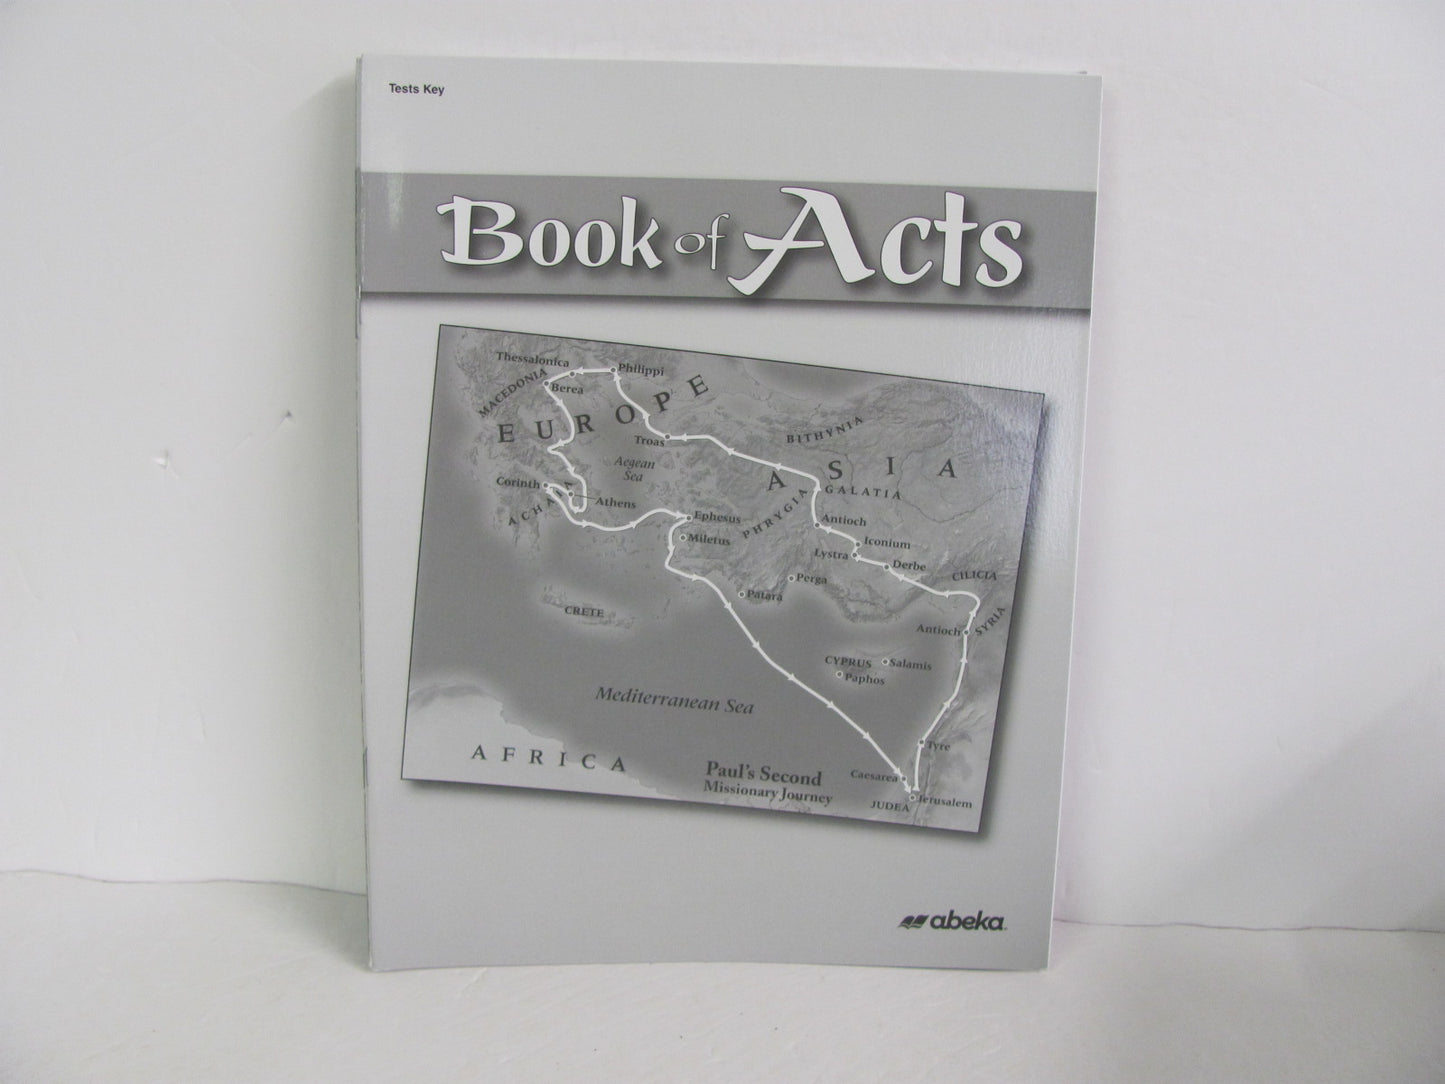 Book of Acts Abeka Test Key Pre-Owned 8th Grade Bible Textbooks